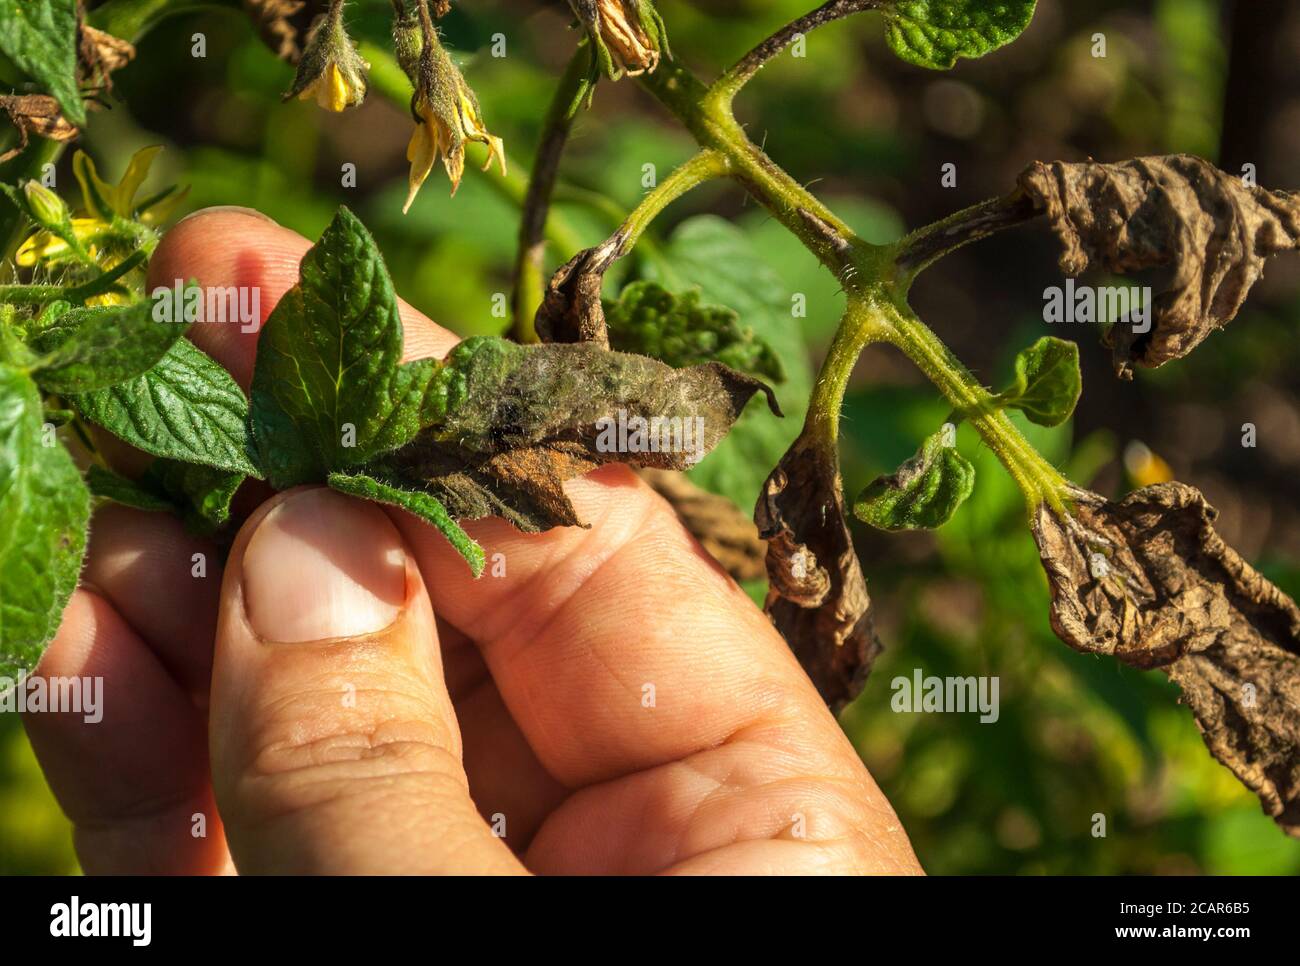 Tomato diseases: late blight. The leaves of the plant are affected by late blight. The photo shows part of the palm of a woman holding the affected le Stock Photo